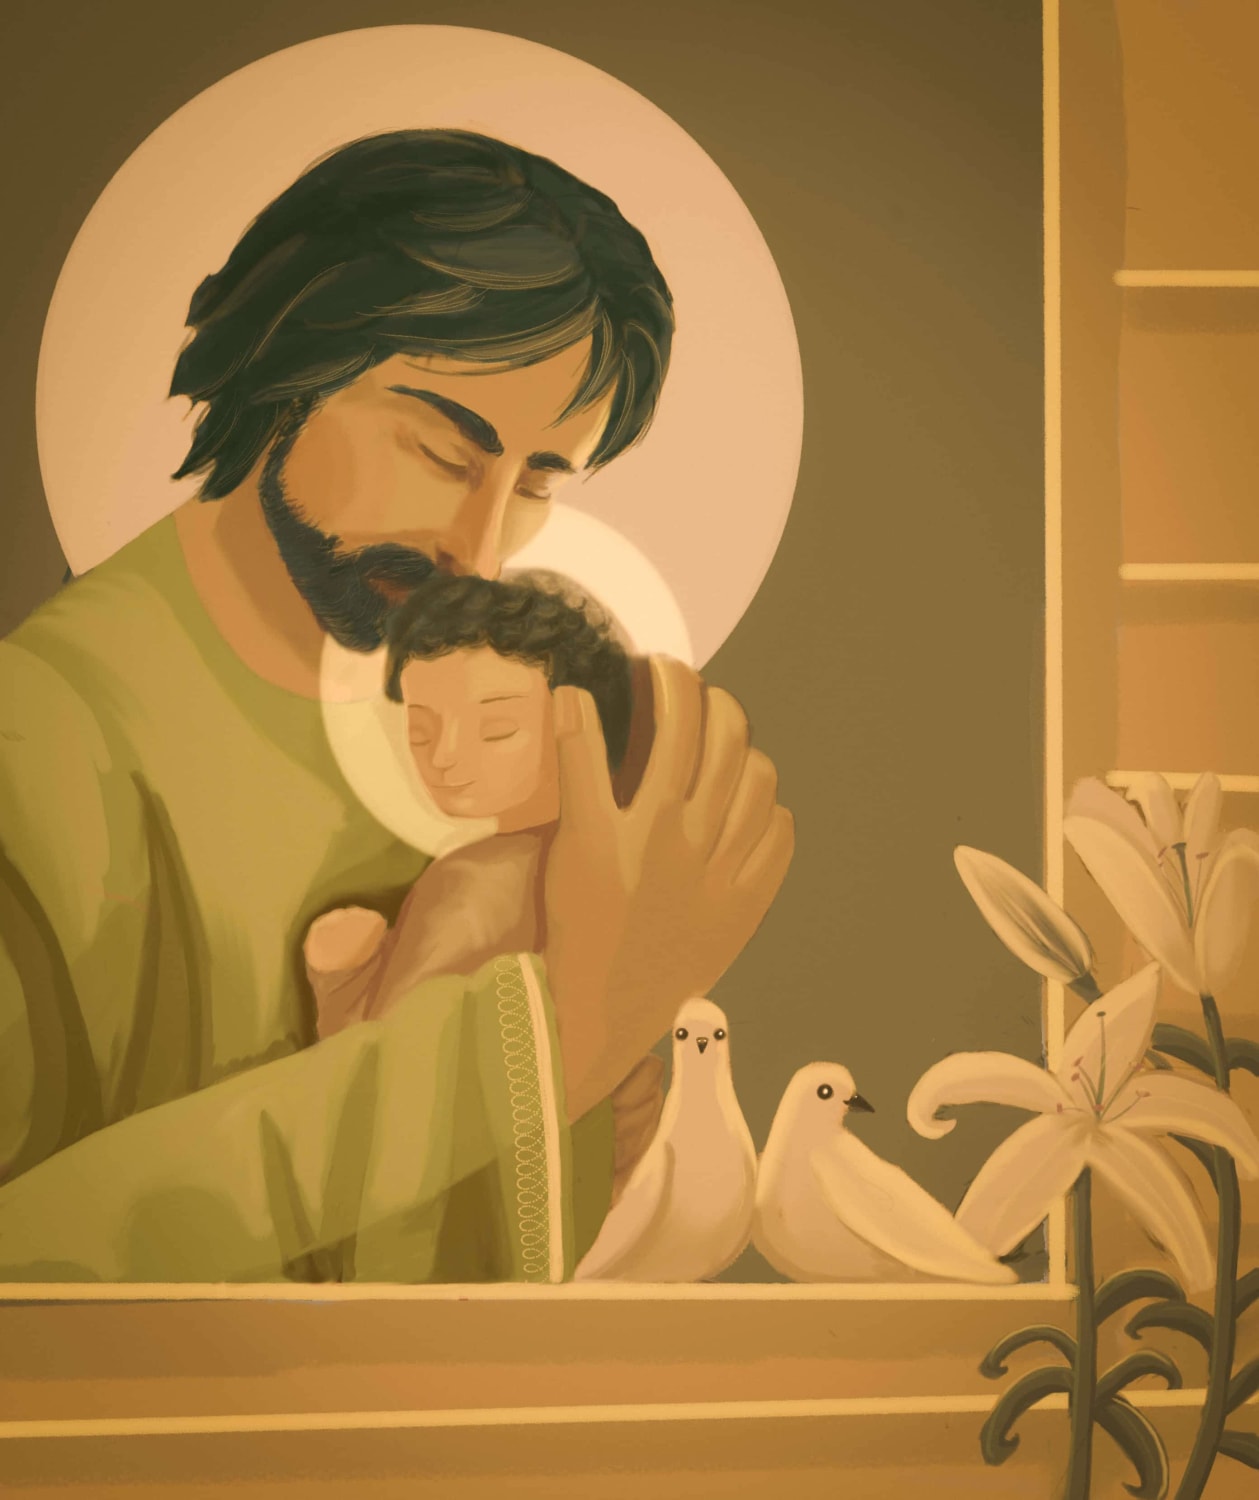 I painted st. Joseph, the saint of the year 2021